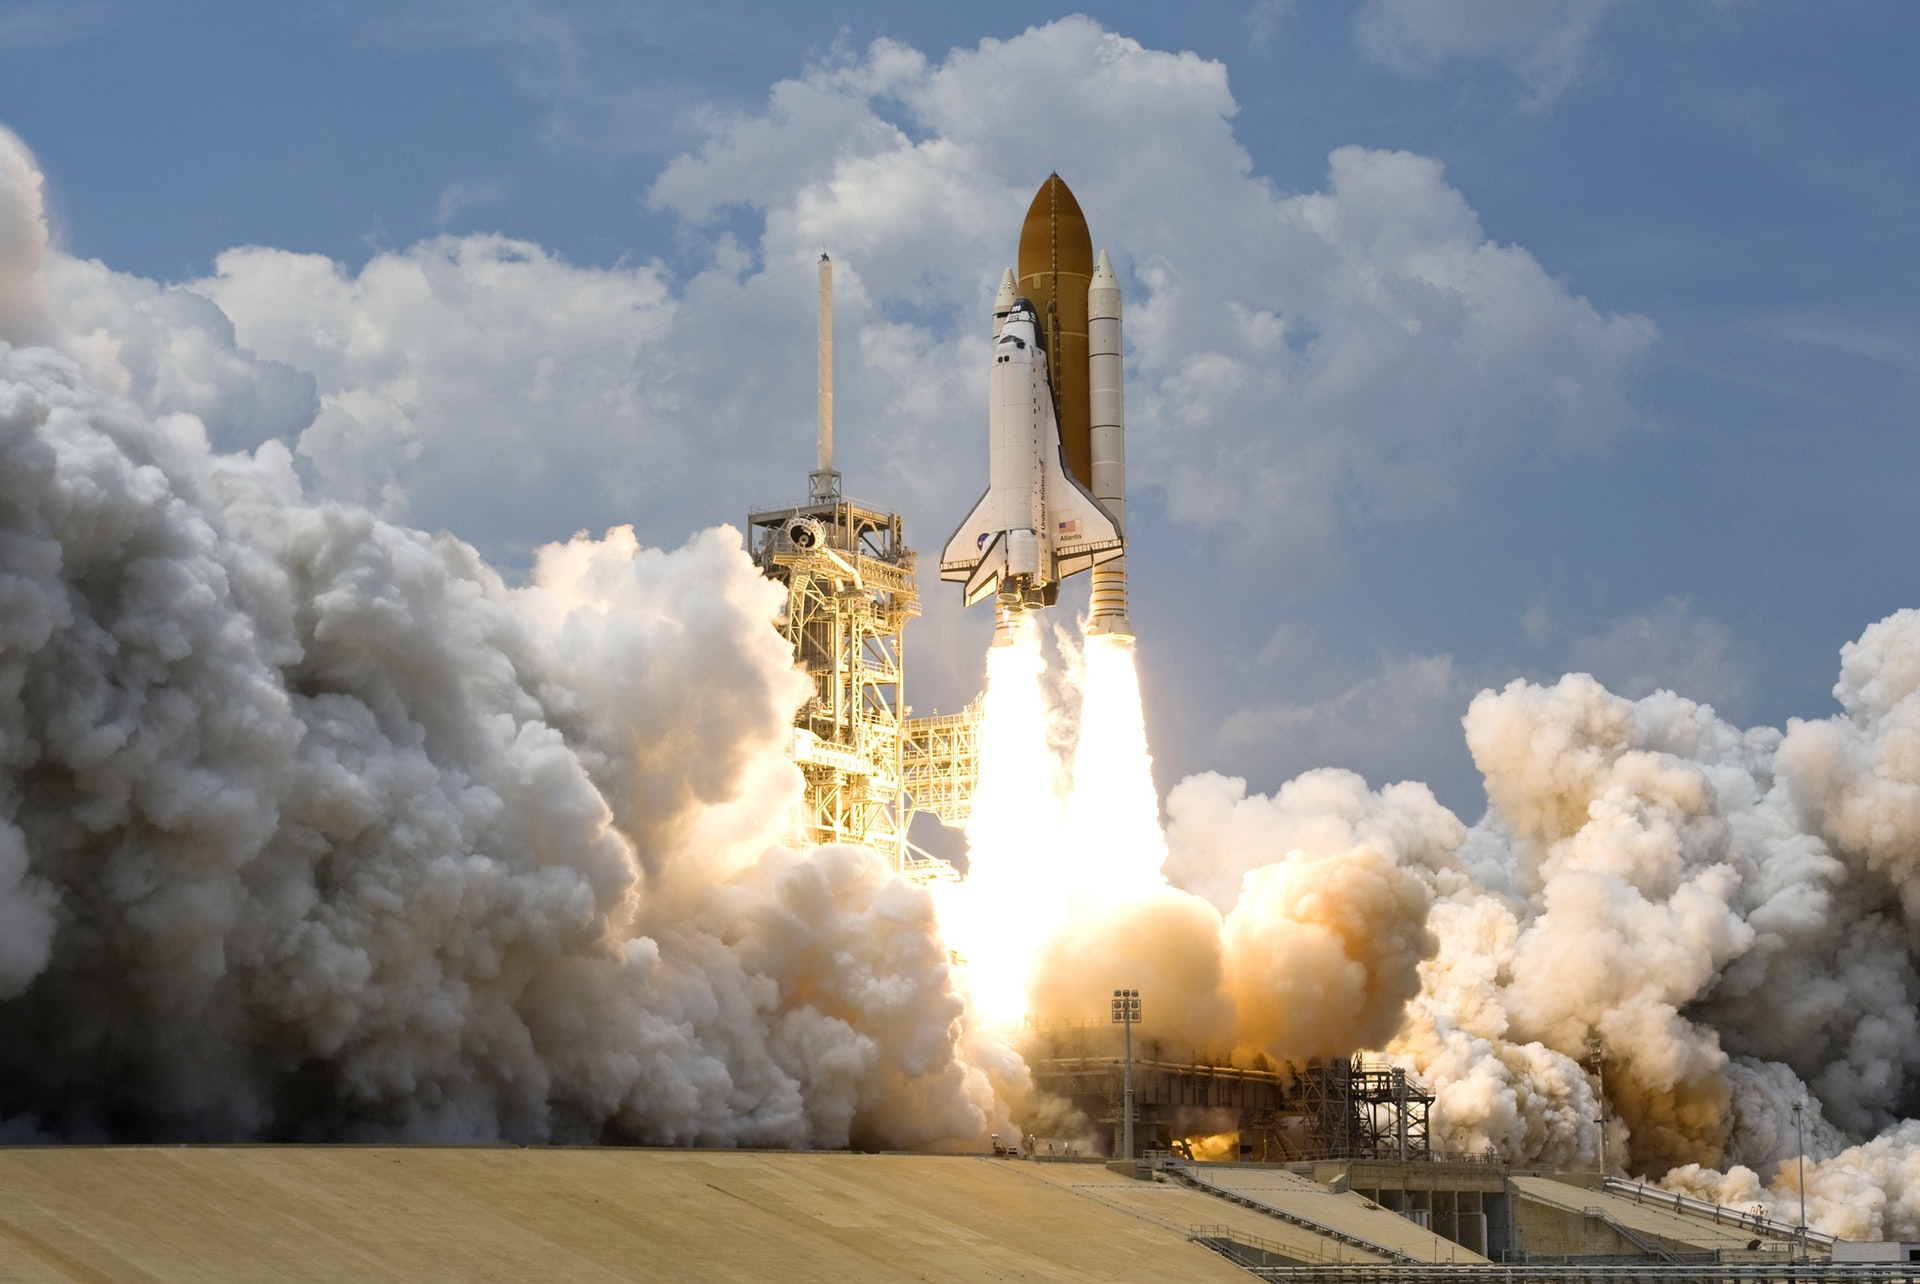 7 Practical Methods to Jump-start your SEO before a Site Launch